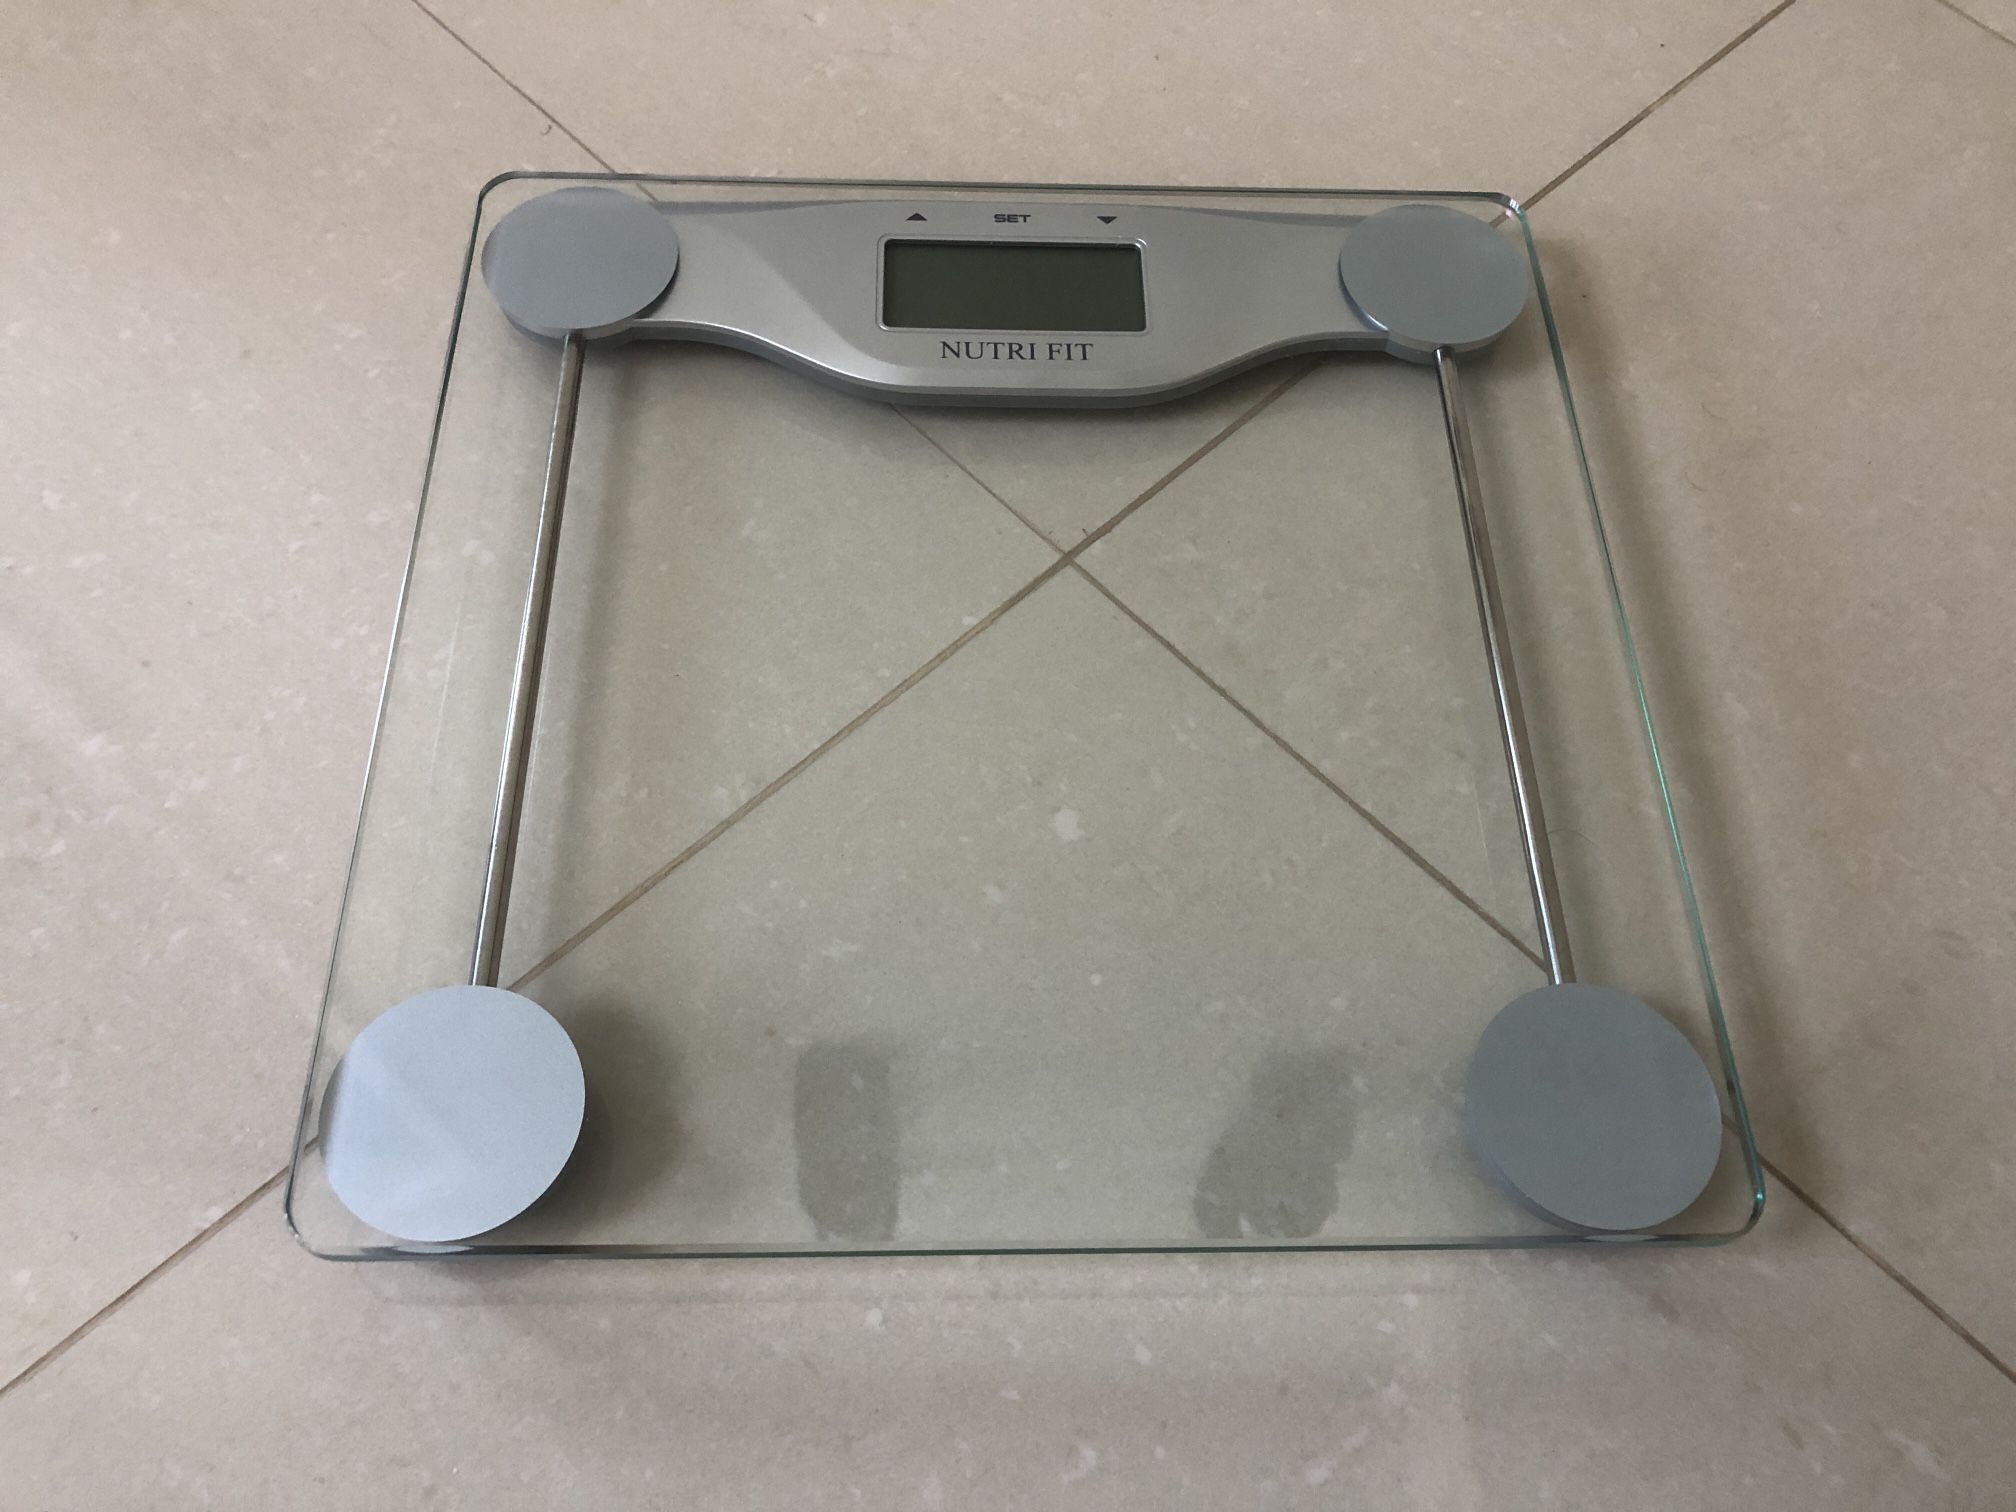 NUTRI FIT Digital Body Weight Bathroom Scale BMI, Accurate Weight  Measurements Scale,Large Backlight Display and Step-On Technology,400 Pounds